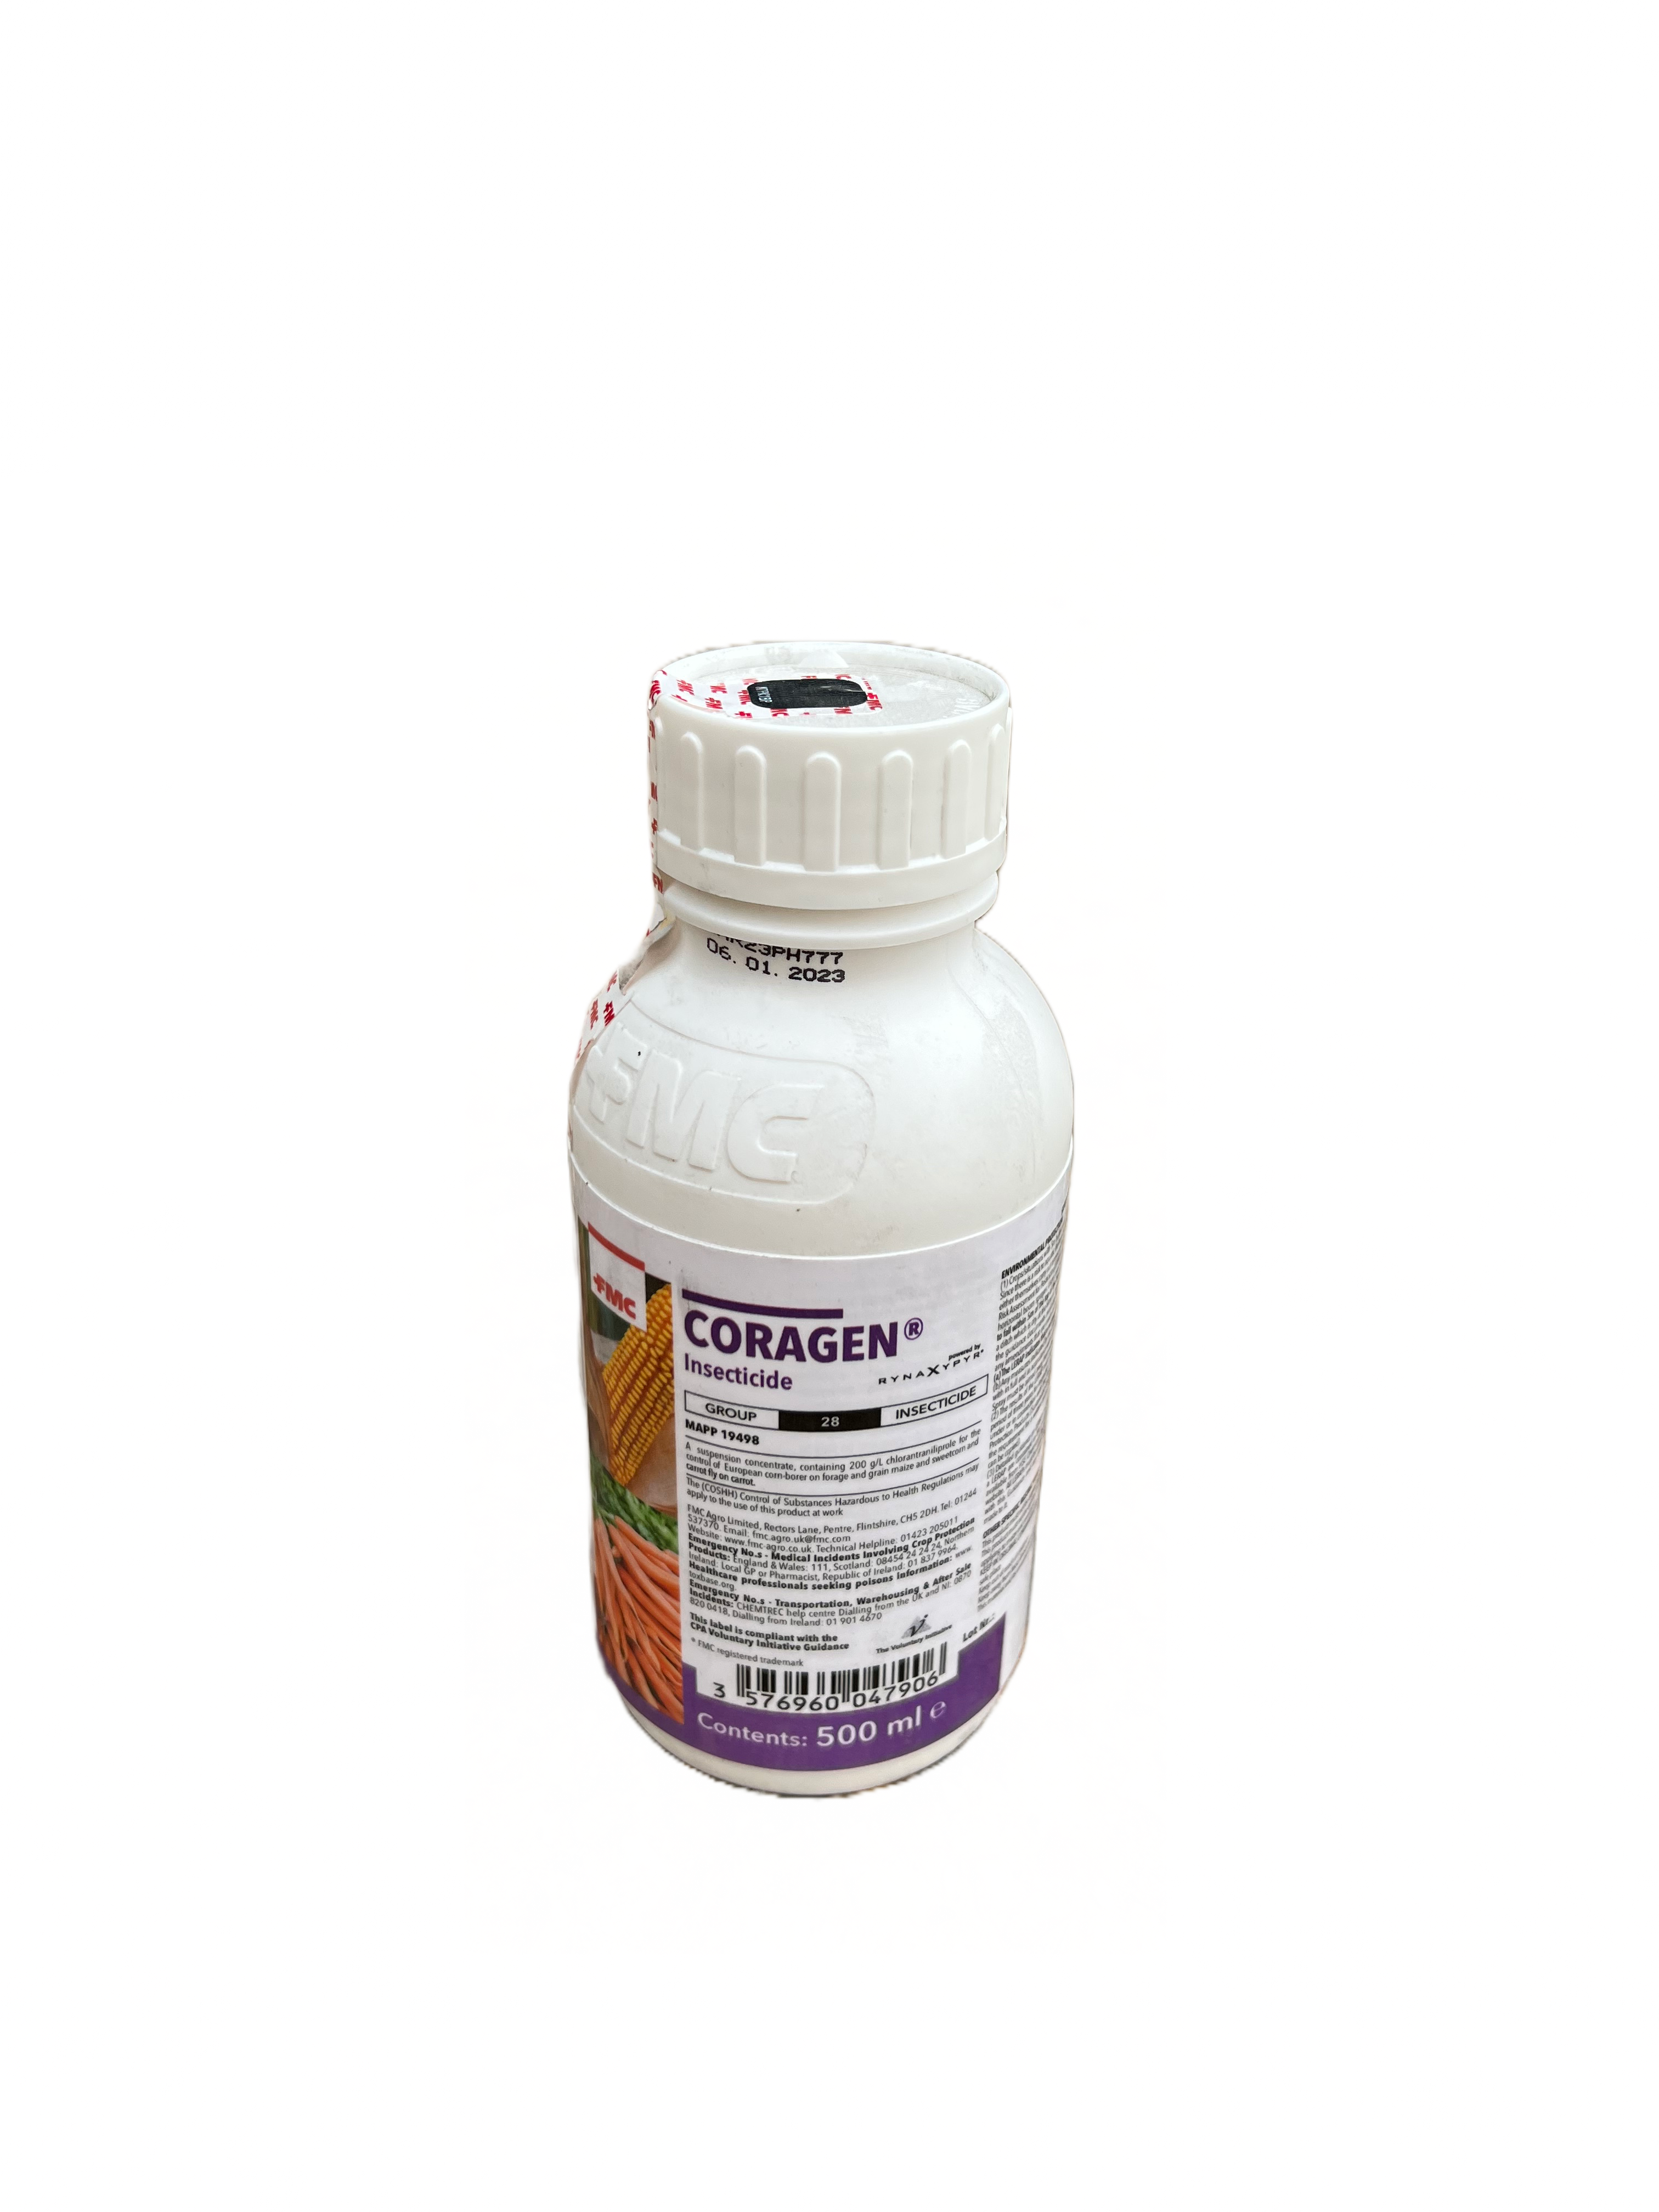 Coragen Agricultural Insectacide 500ml Chlorantraniliprole - UK Amenity Ltd